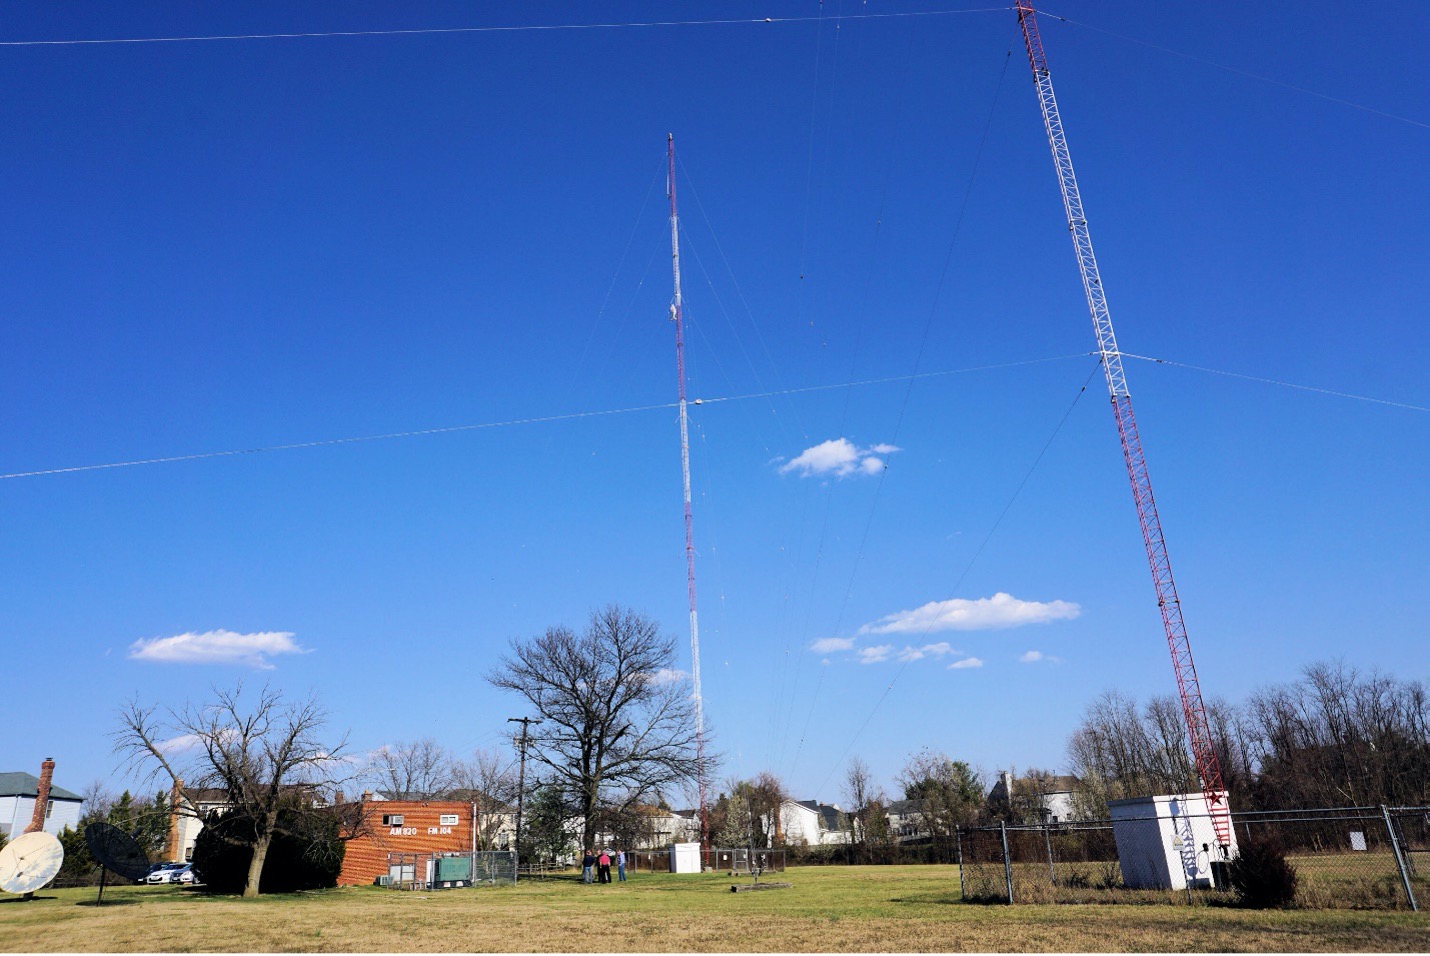 Two-tower array of station WWFD, 820 kHz, Frederick, Md